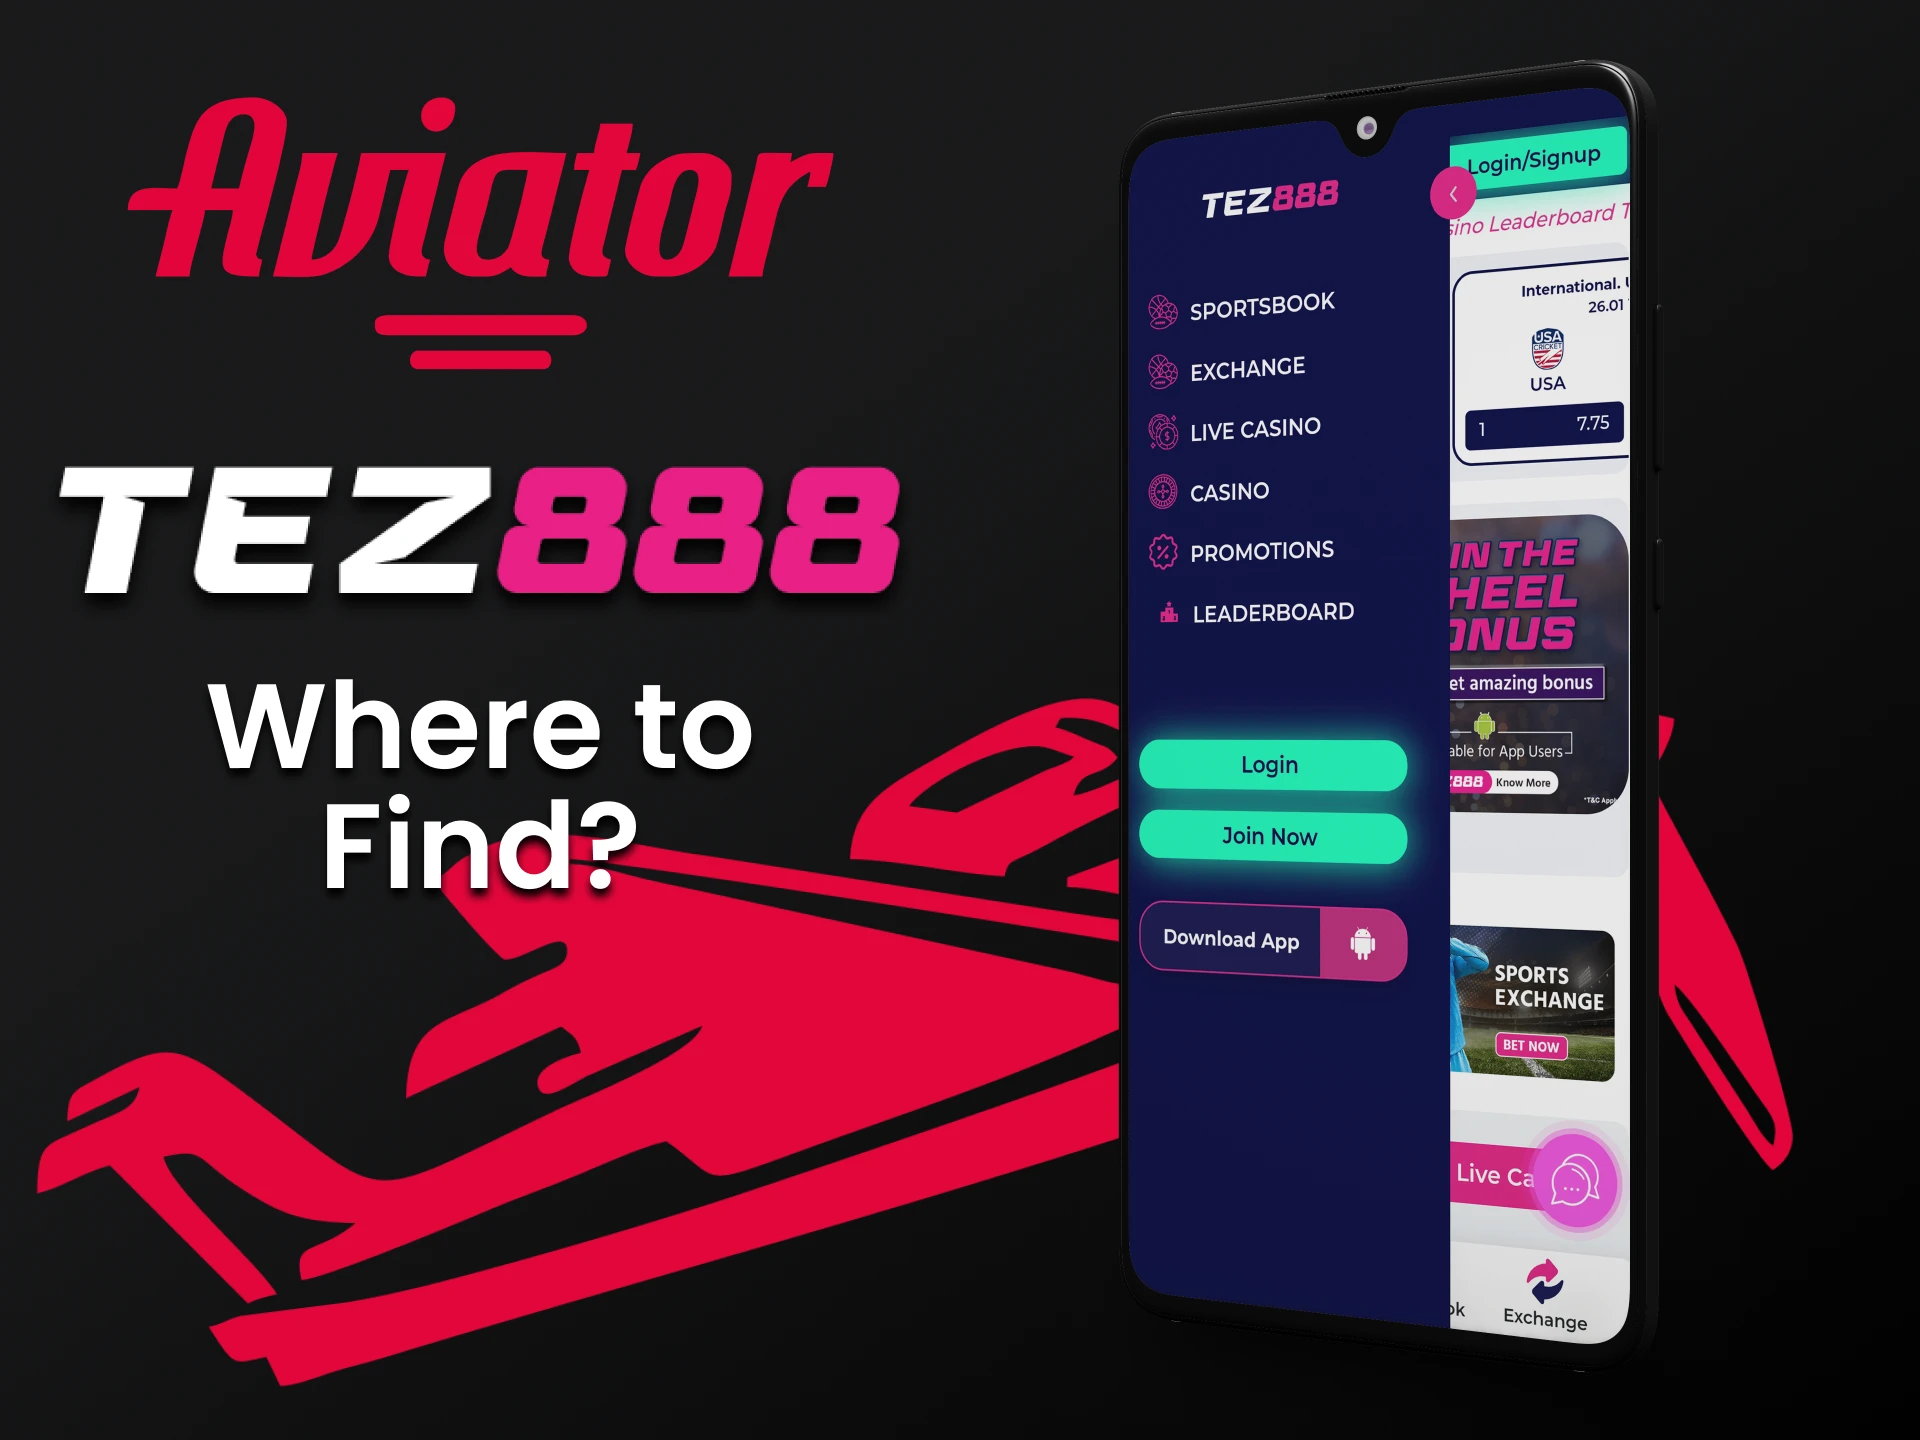 We will tell you where to find Aviator in the Tez888 application.